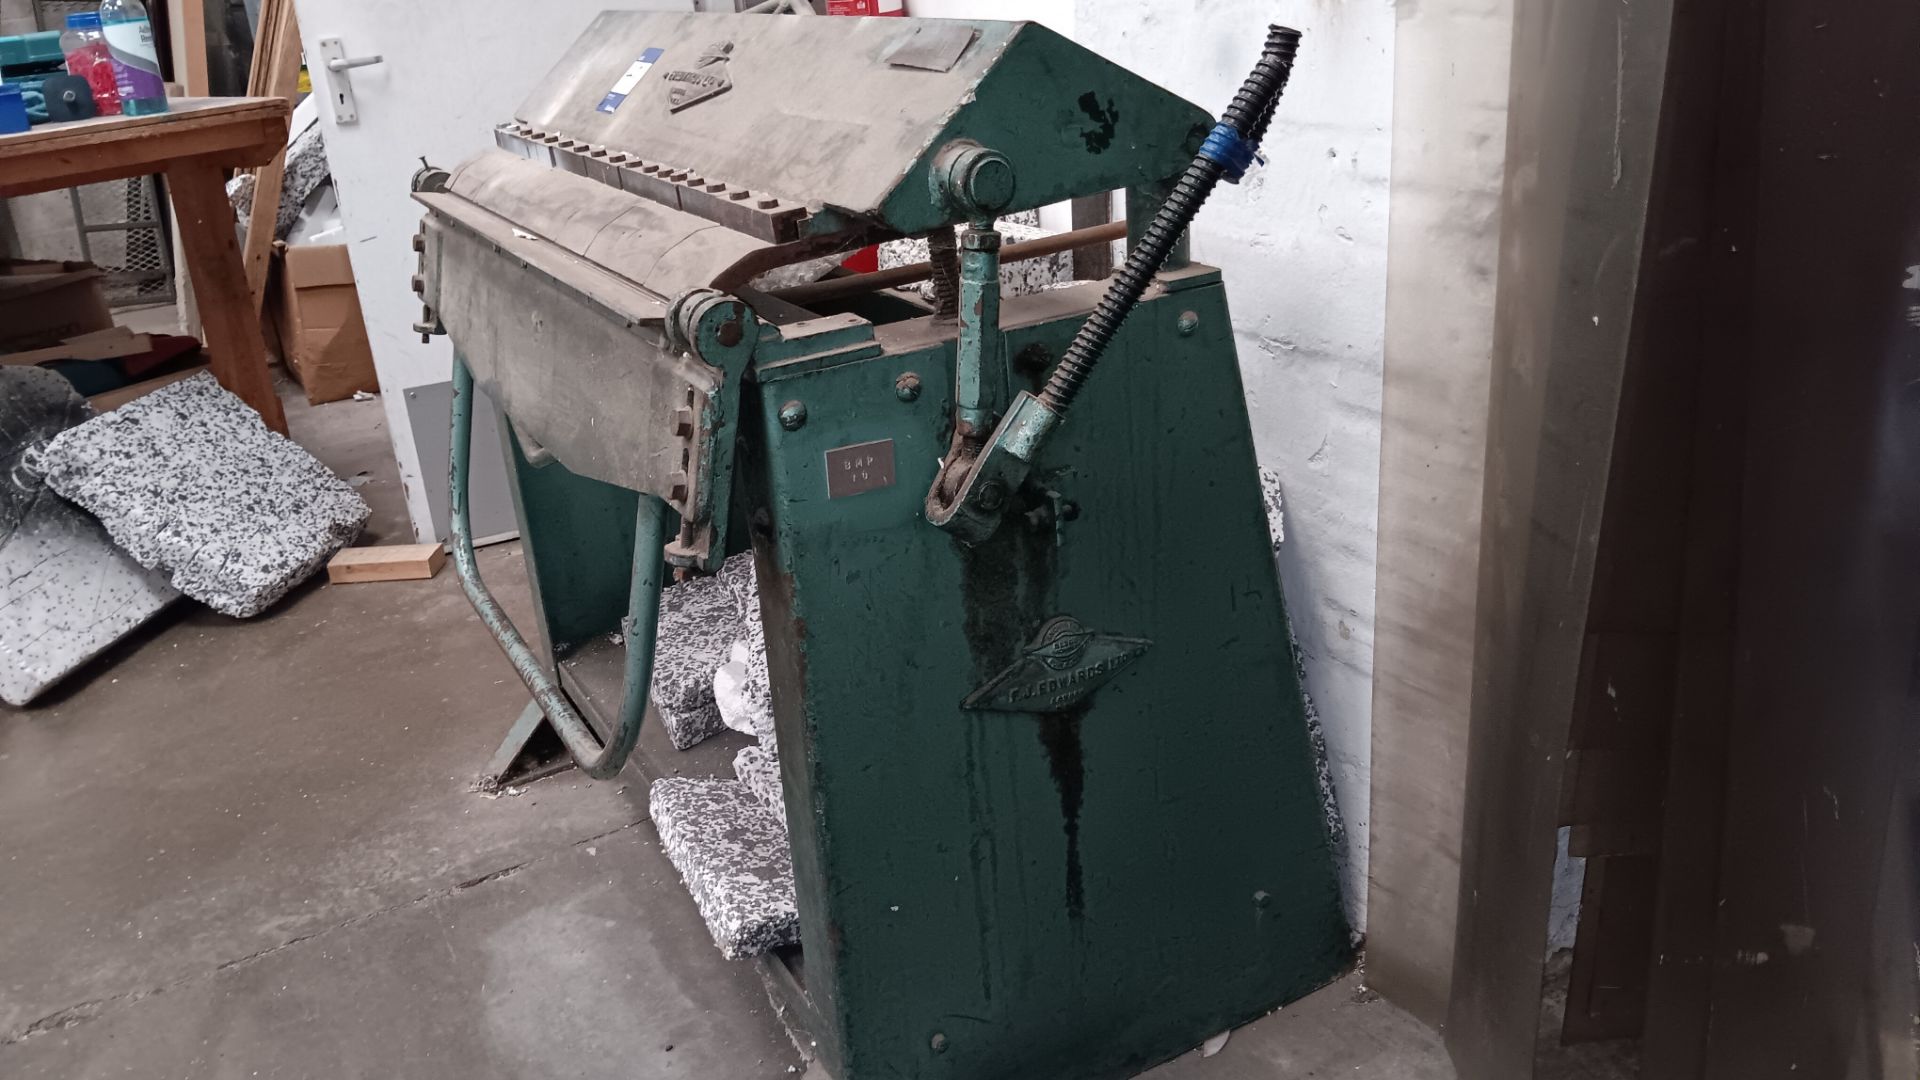 FJ Edwards 3 foot box and pan folder, serial number 05867 – Located in Unit 3 - Image 2 of 8